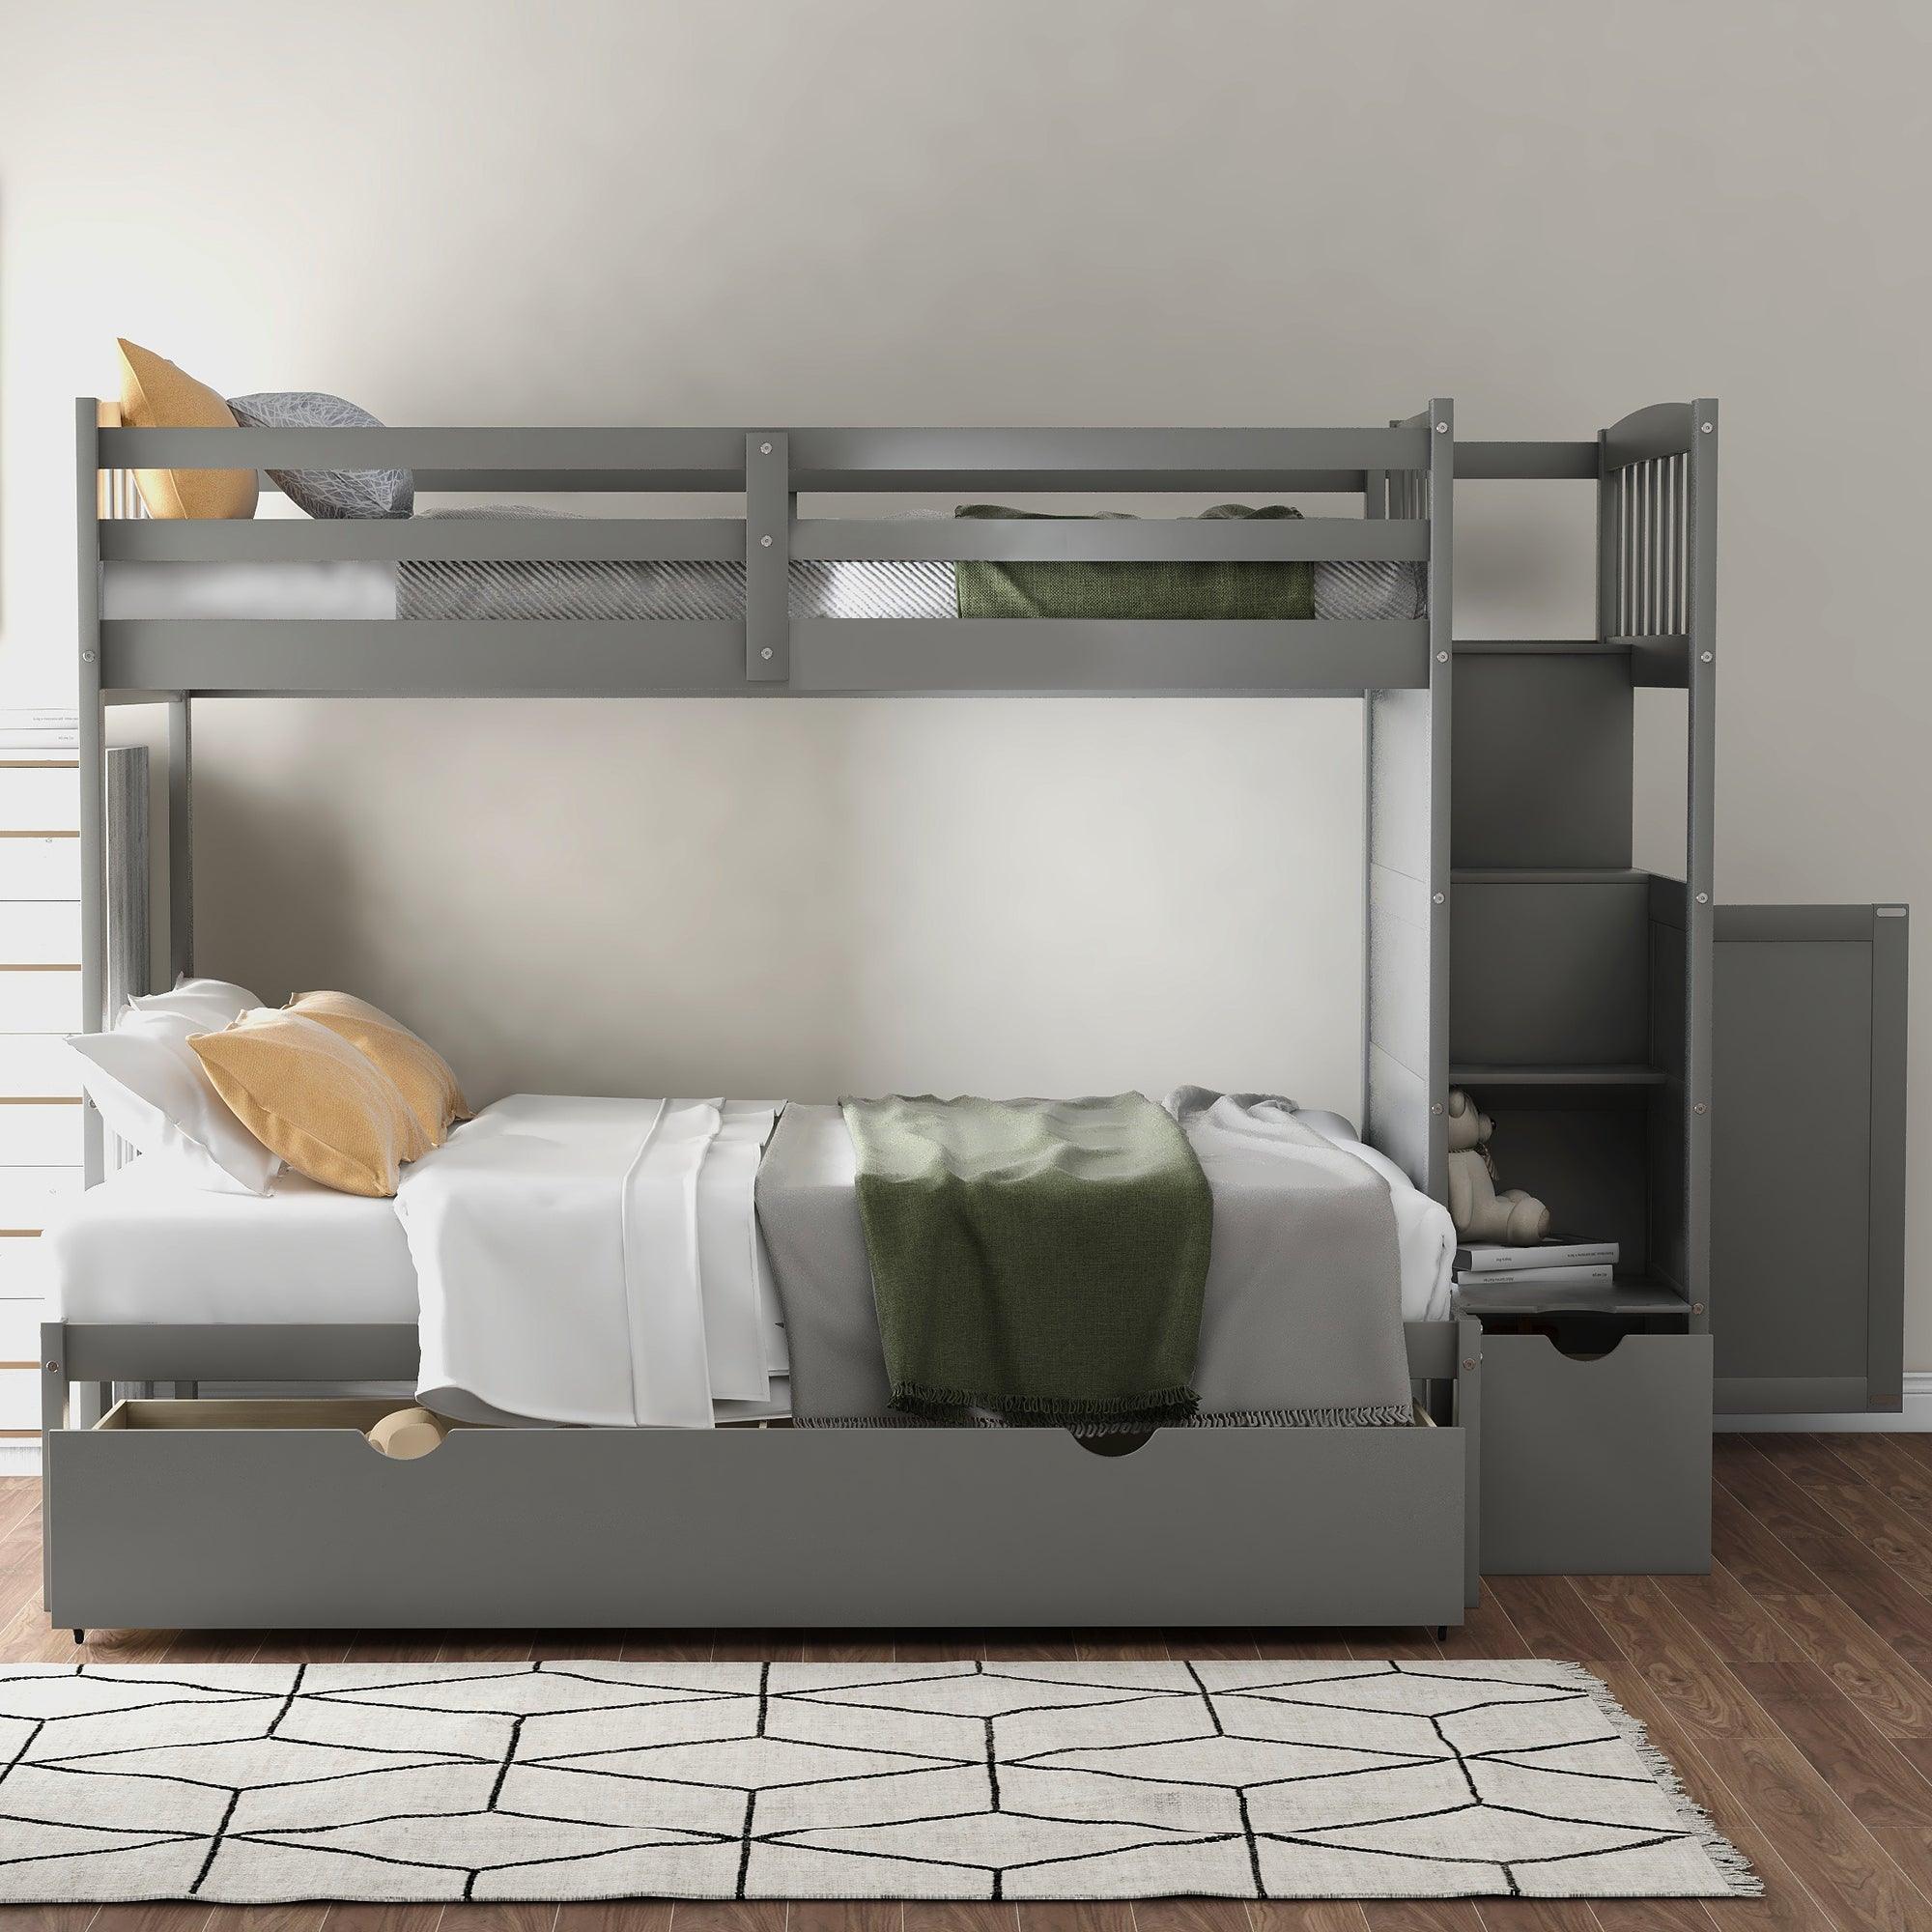 🆓🚛 Twin Over Full/Twin Bunk Bed, Convertible Bottom Bed, Storage Shelves & Drawers, Gray